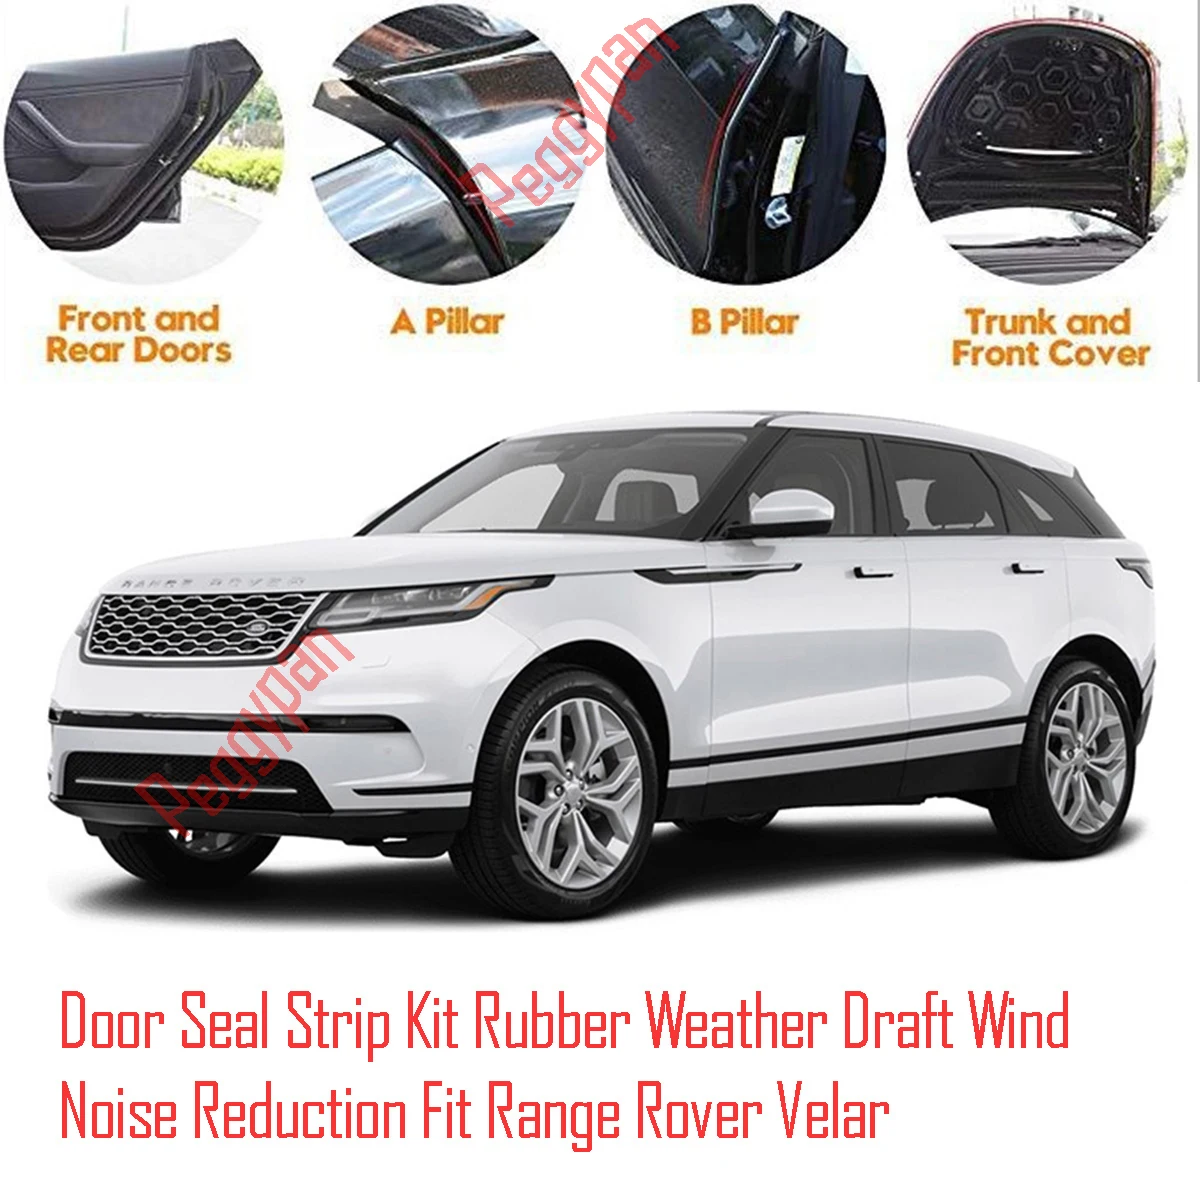 Door Seal Strip Kit Self Adhesive Window Engine Cover Soundproof Rubber Weather Draft Wind Noise Reduction For Range Rover Velar